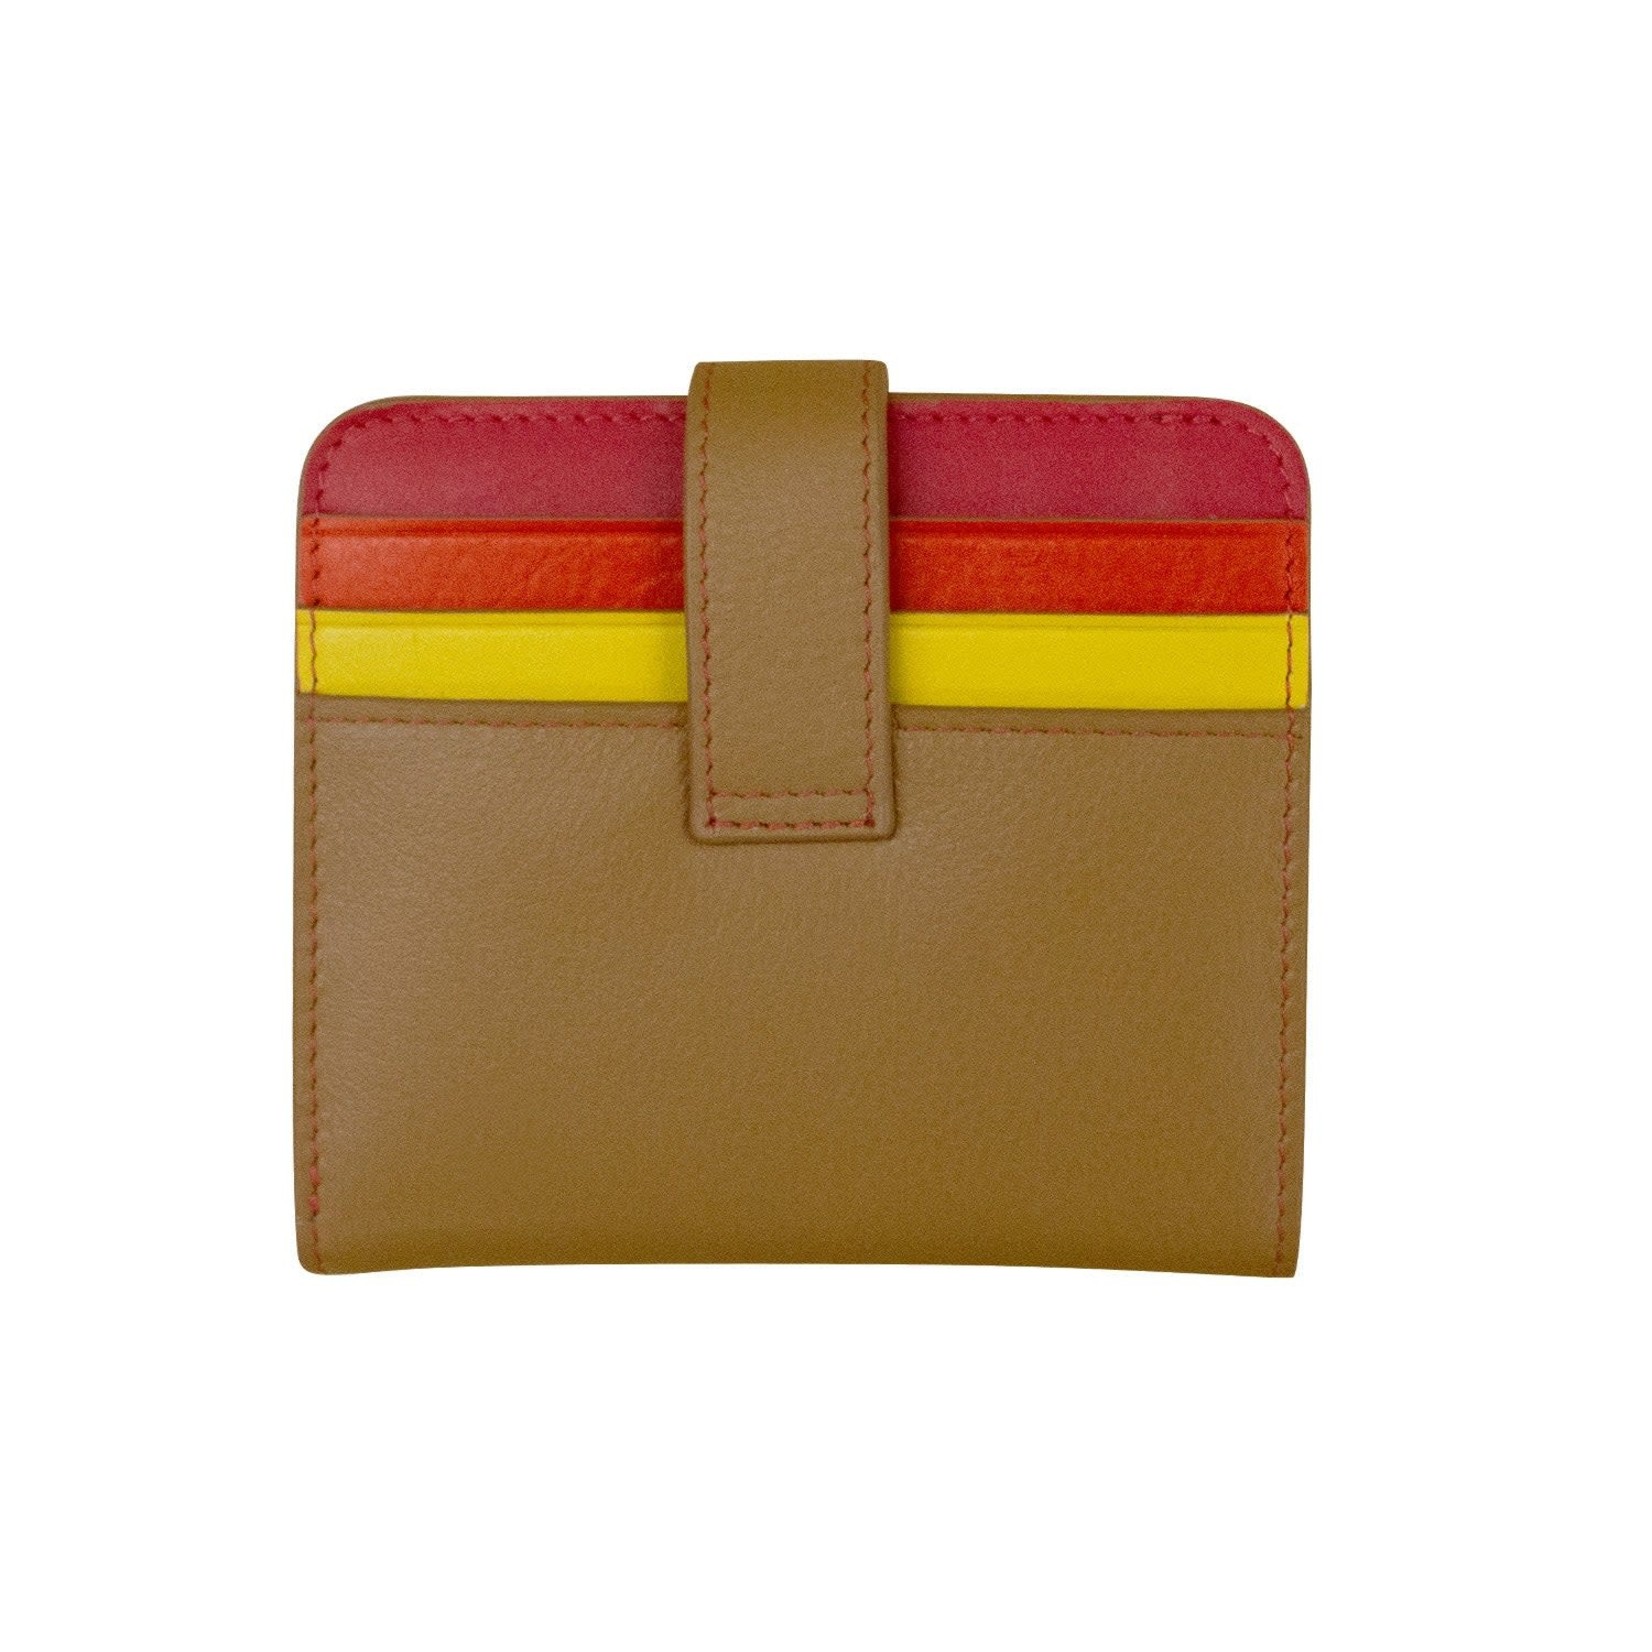 Leather Handbags and Accessories 7301 Rainbow Multi - RFID Small Wallet